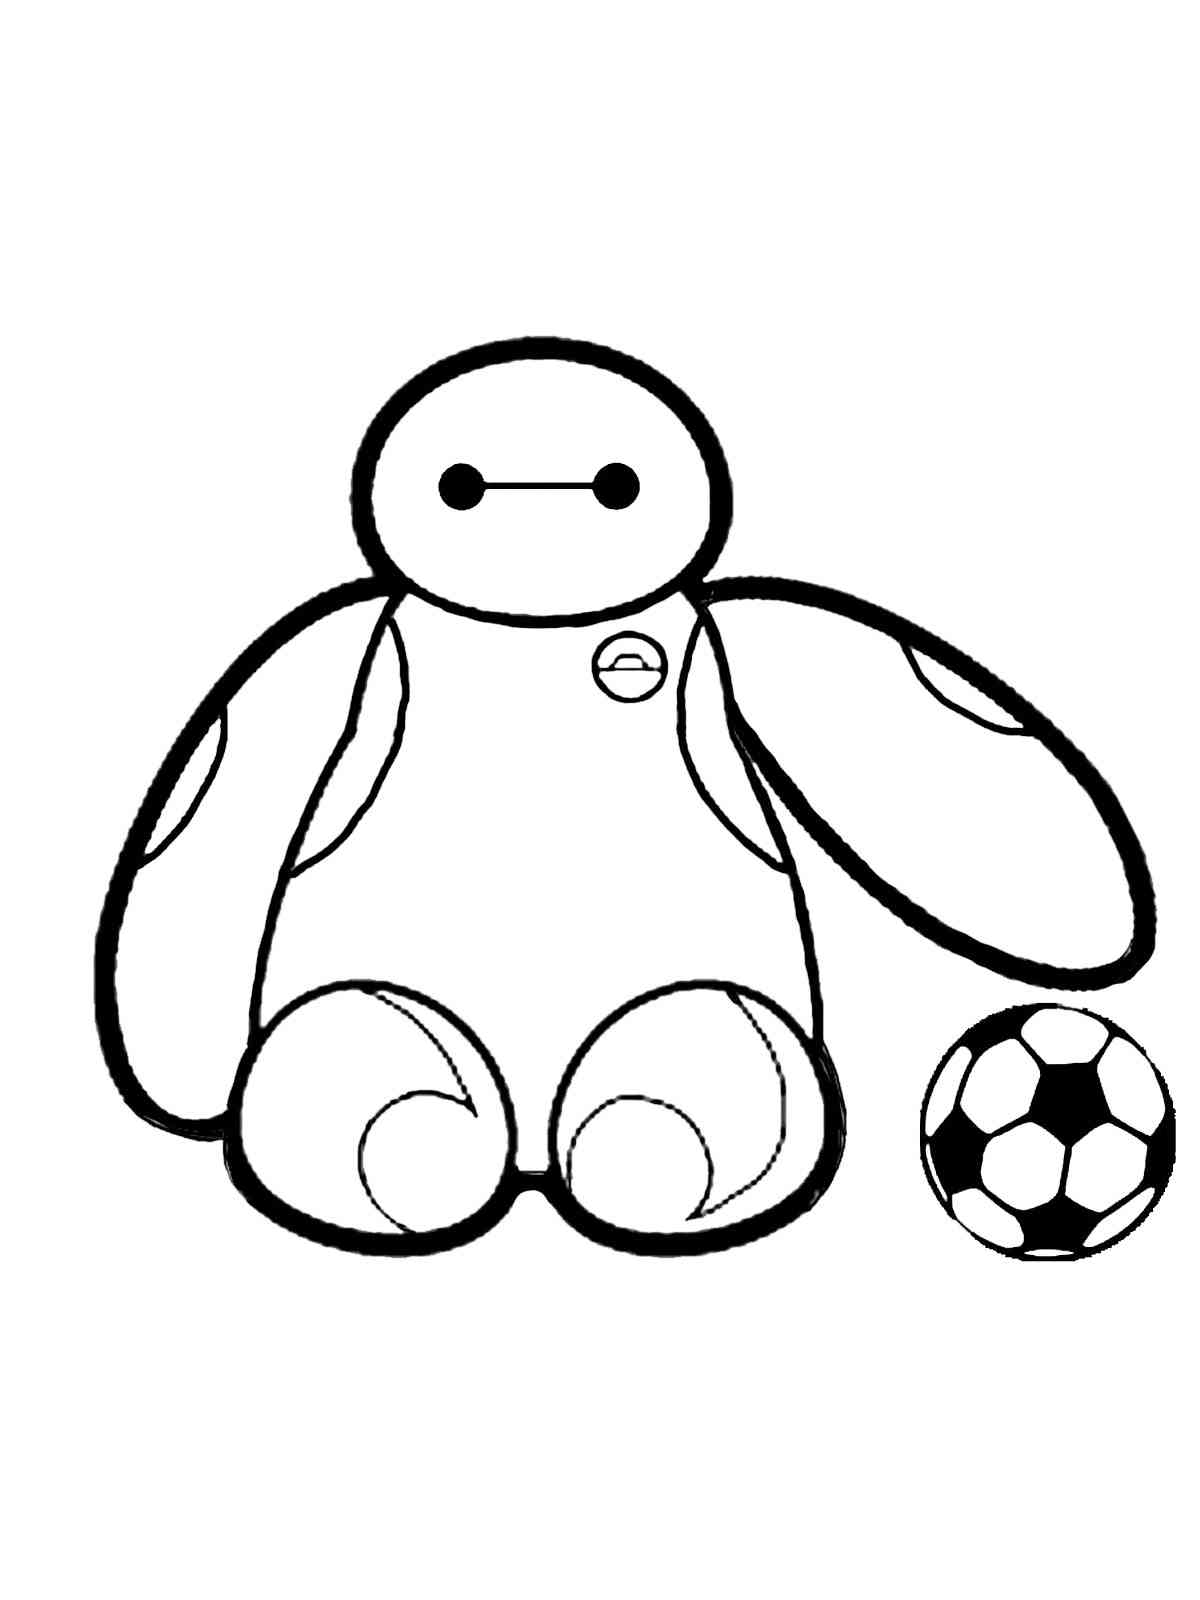 Cute Baymax coloring page